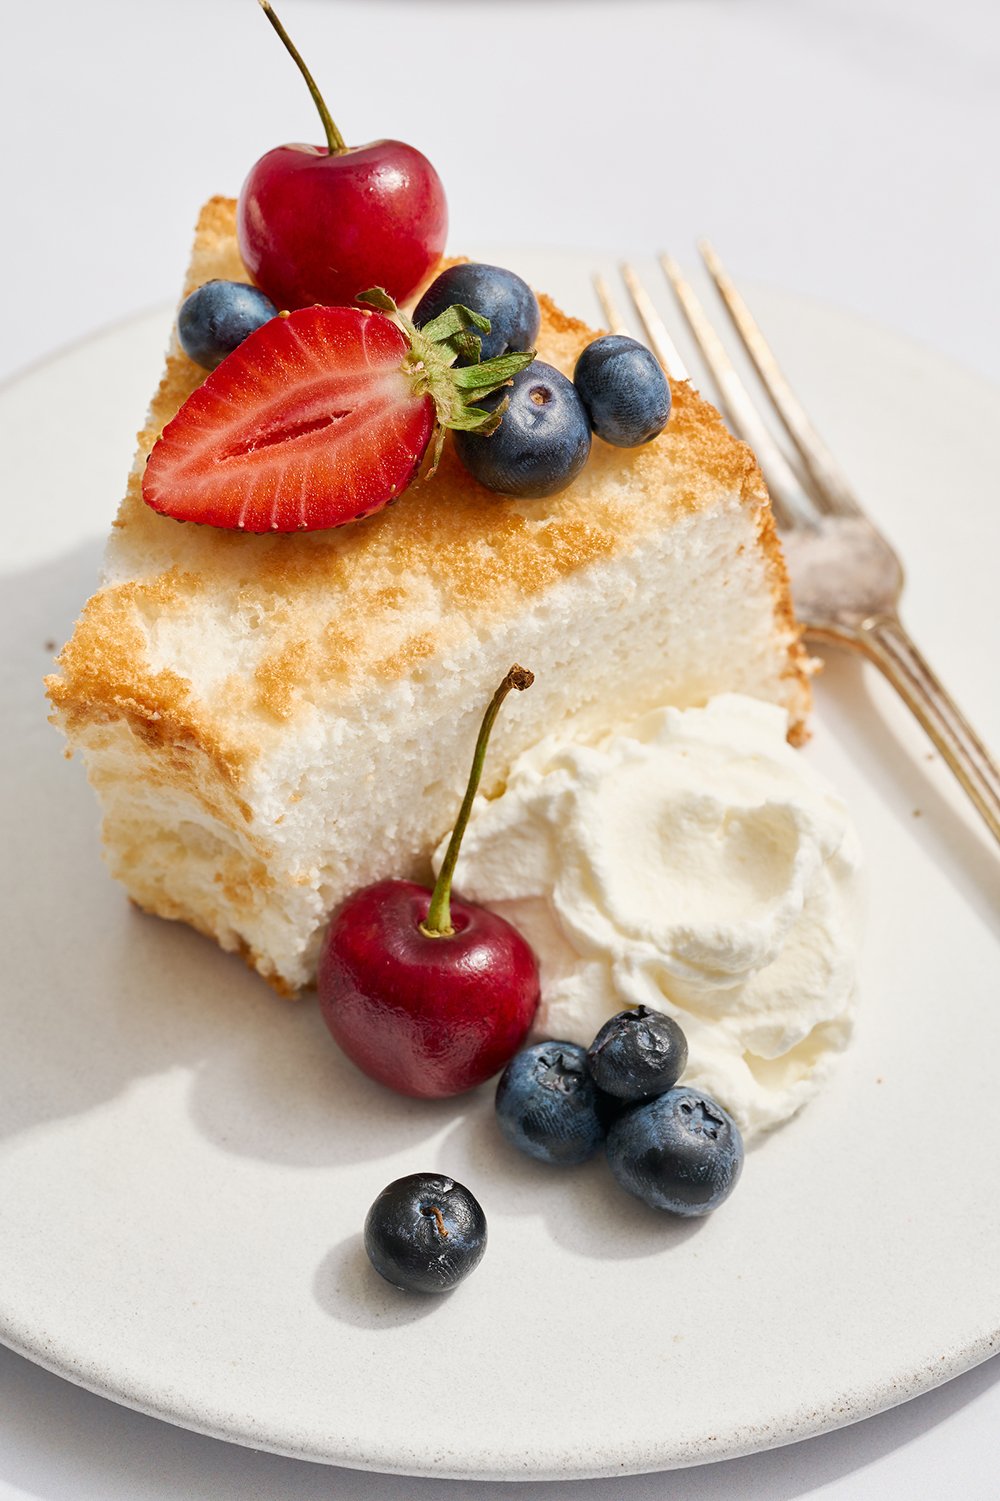 slice of angel food cake on a white plate with a fork, and whipped cream and berries to serve